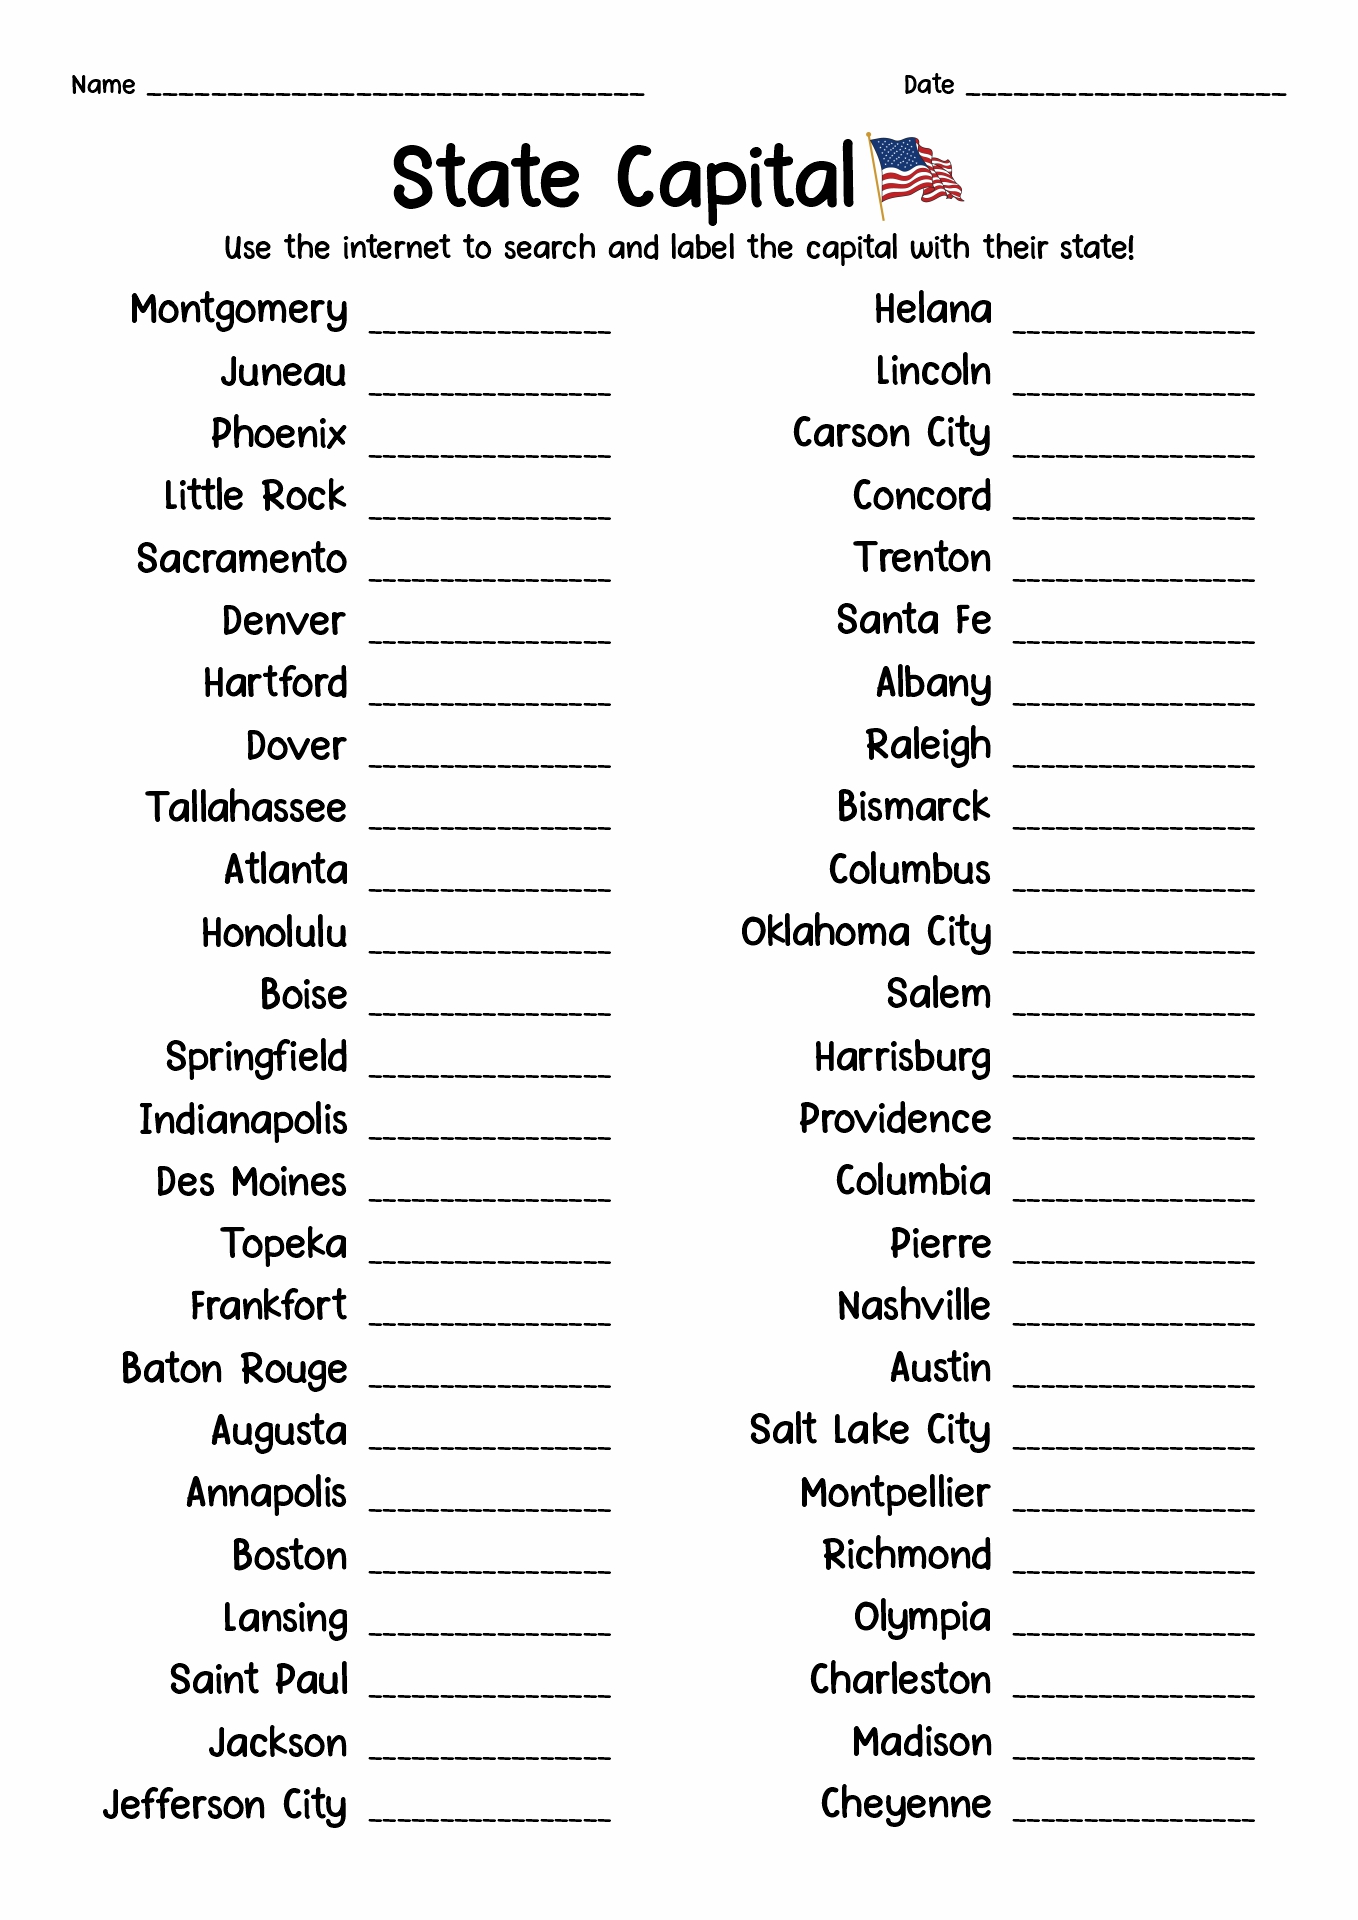 50 States and Capitals List Worksheet Image